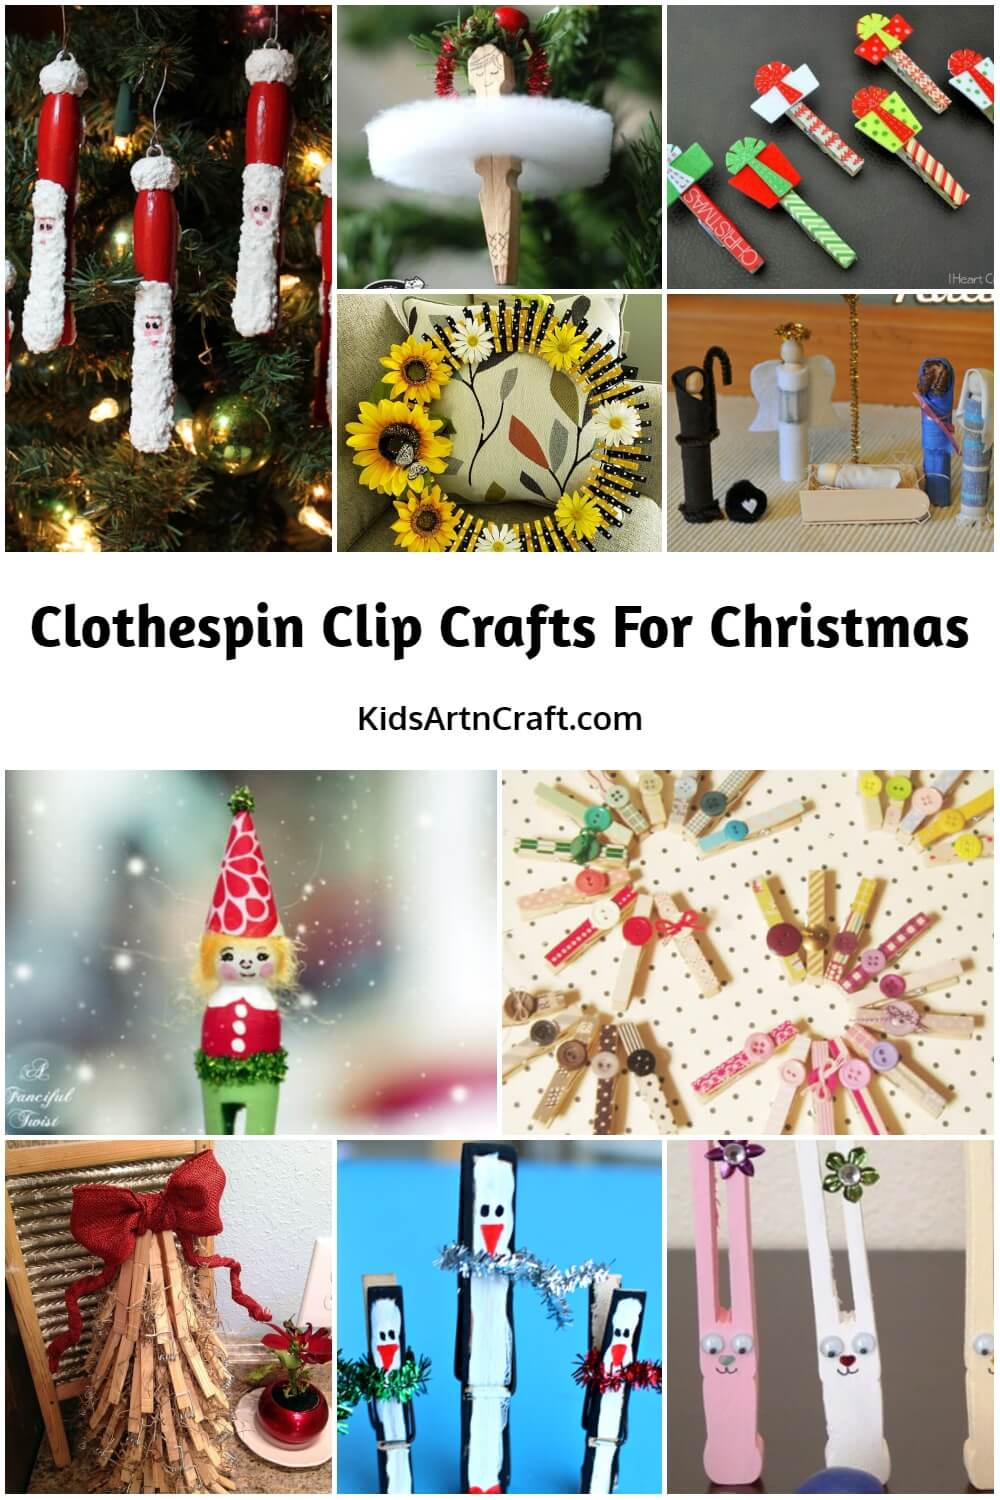 Clothespin Clip Crafts for Christmas